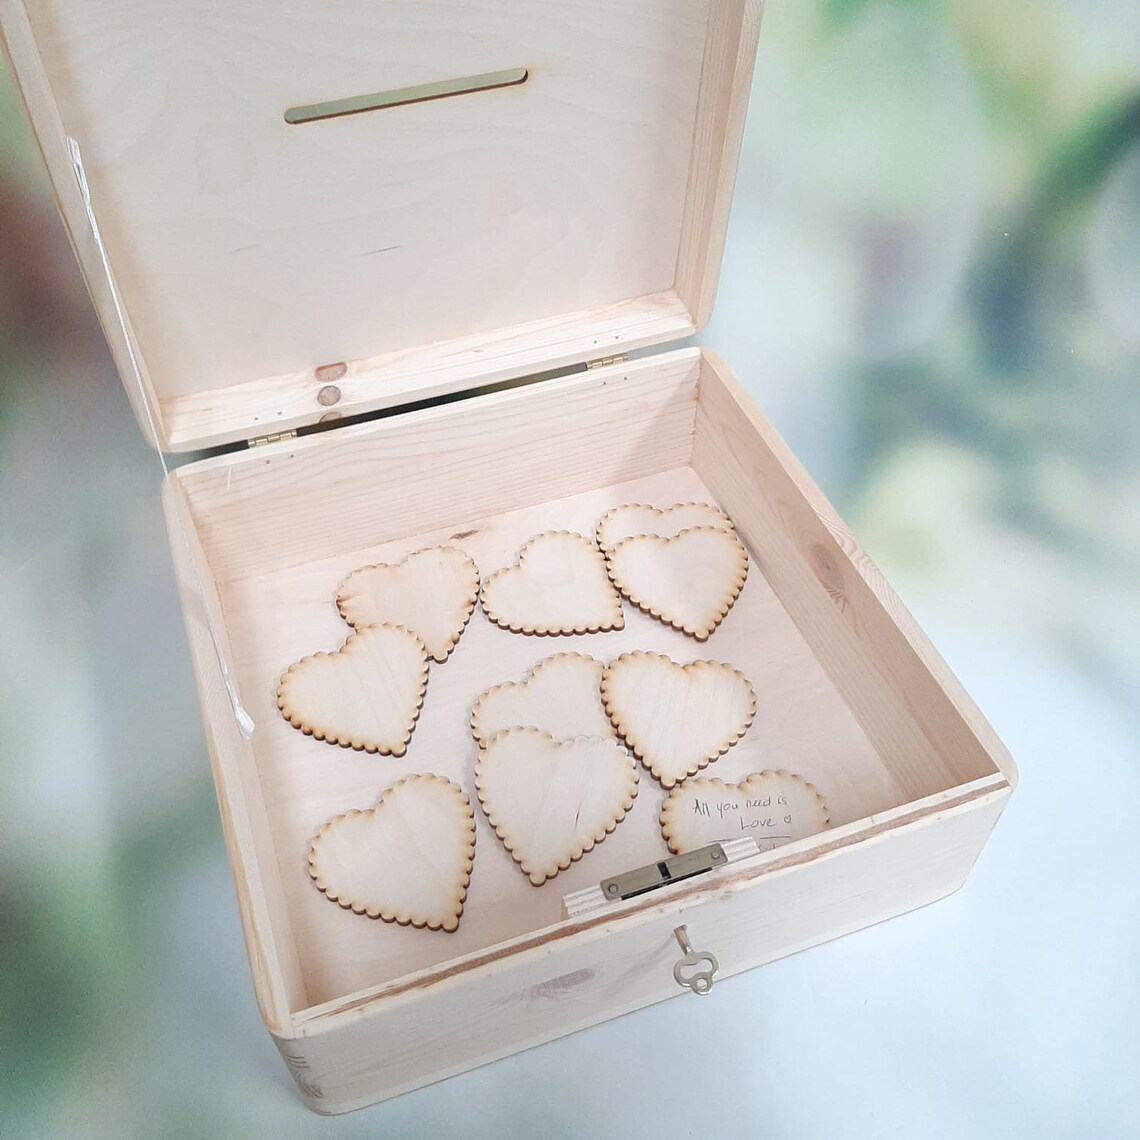 Customised Wooden Wedding Card Box - Inside With Hearts